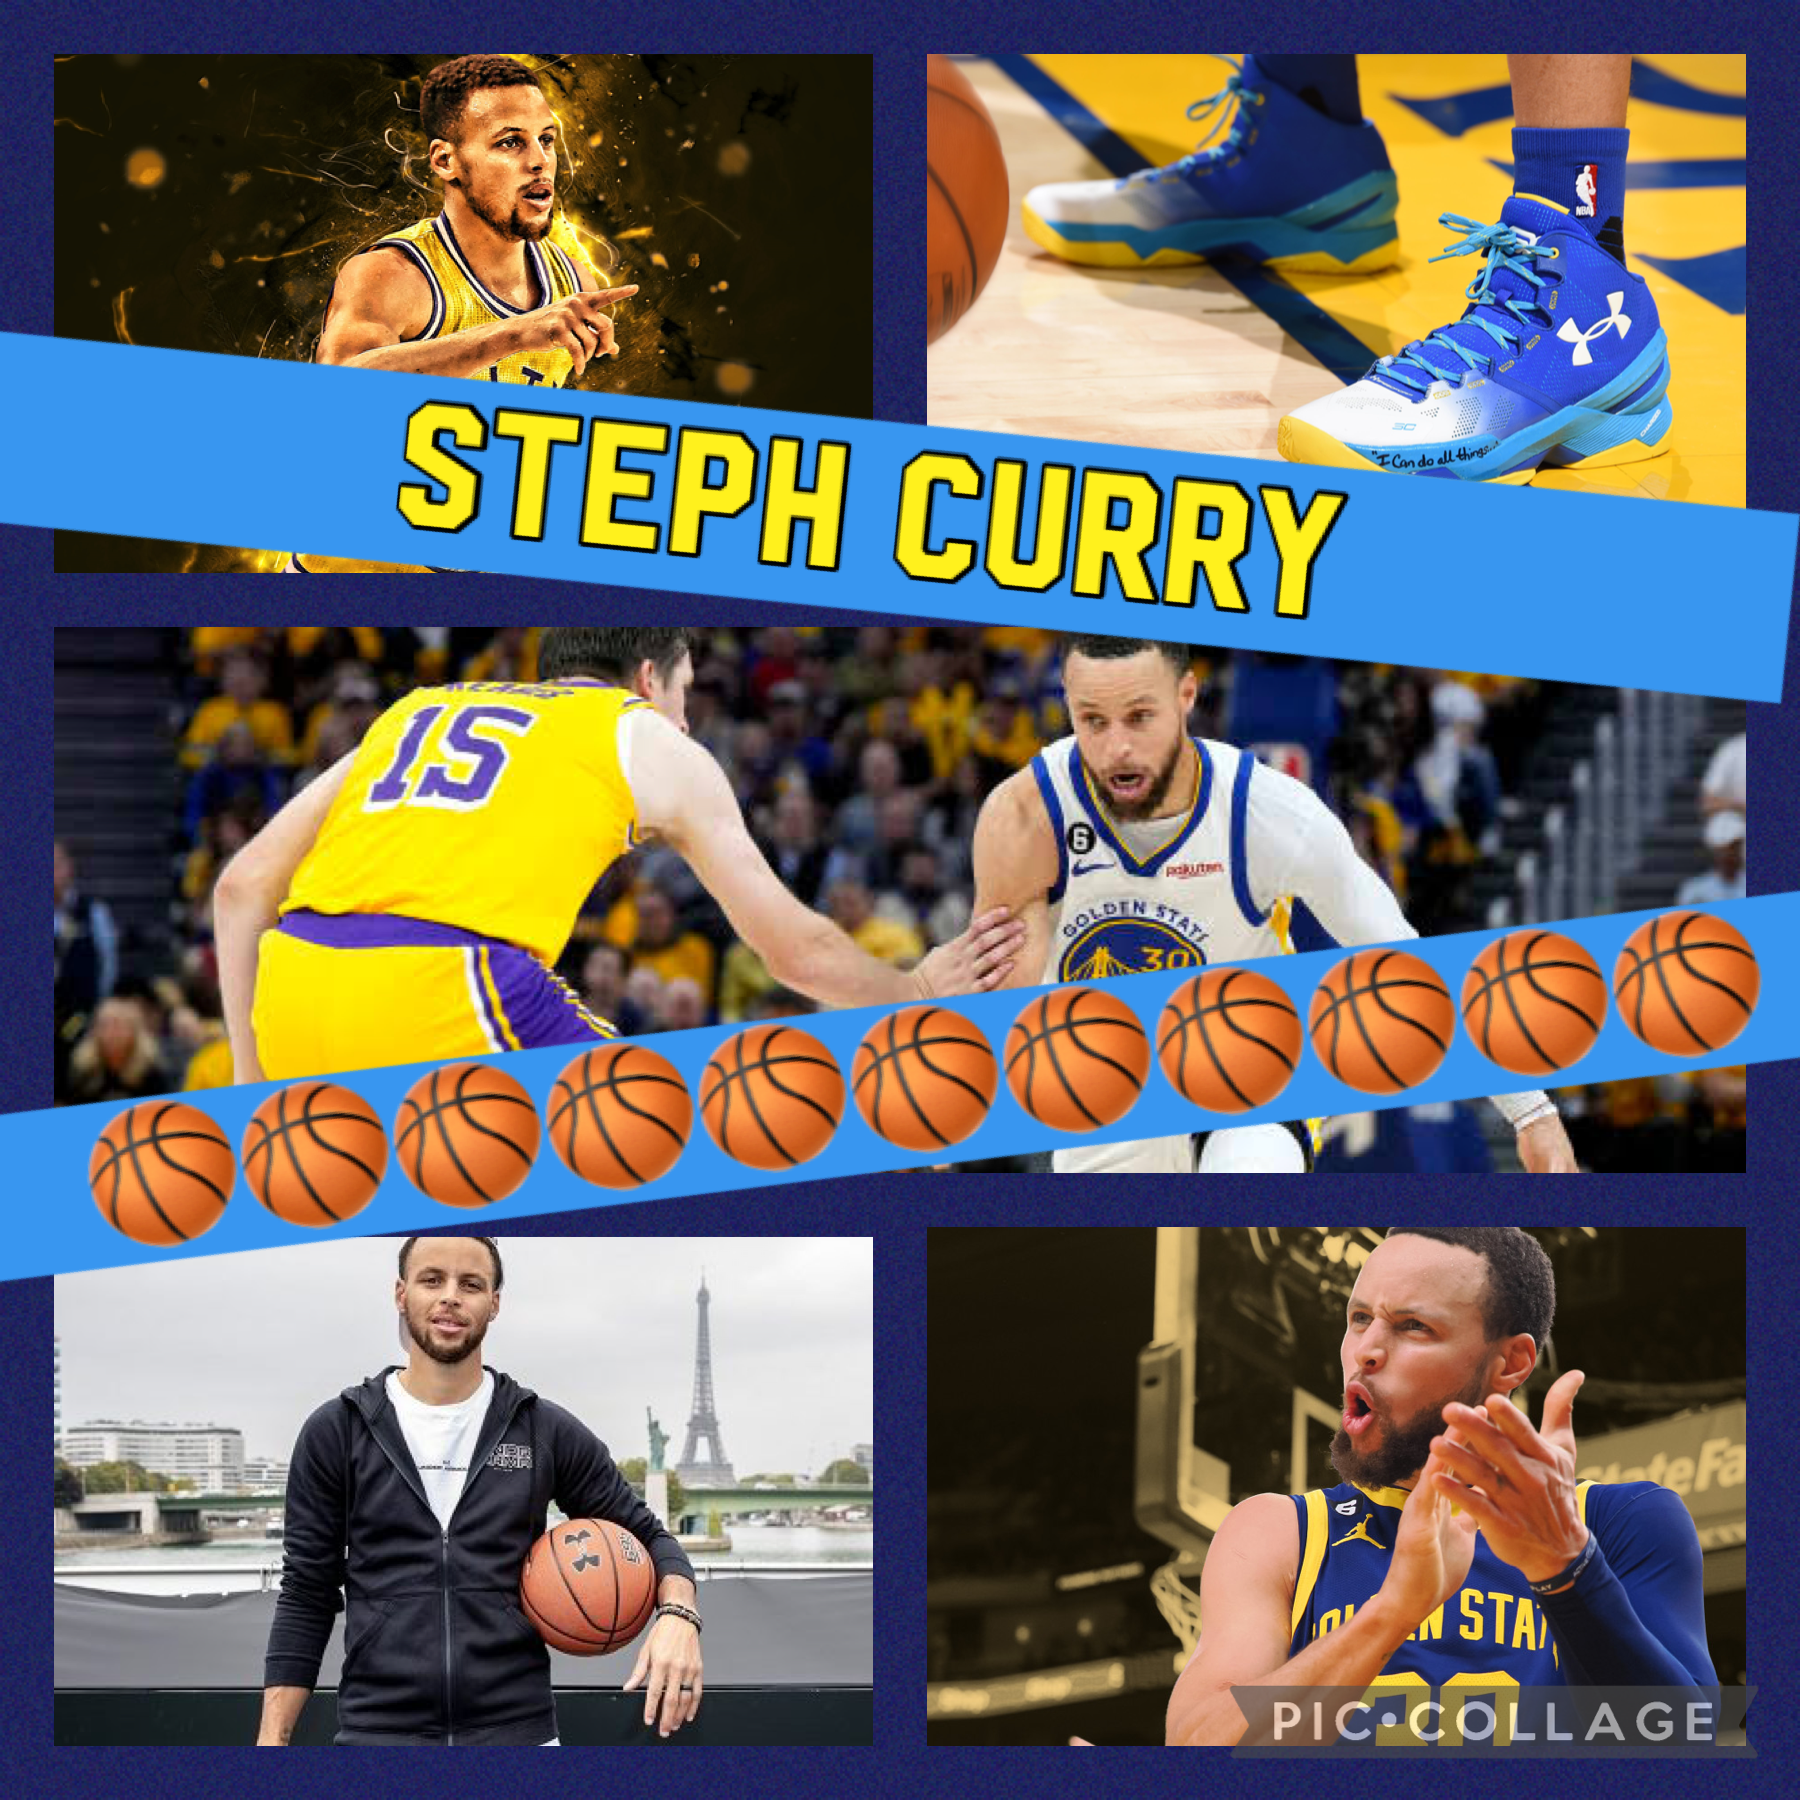 🏀tap🏀

Btw this is Steph Curry is my favorite basketball player 🏀 